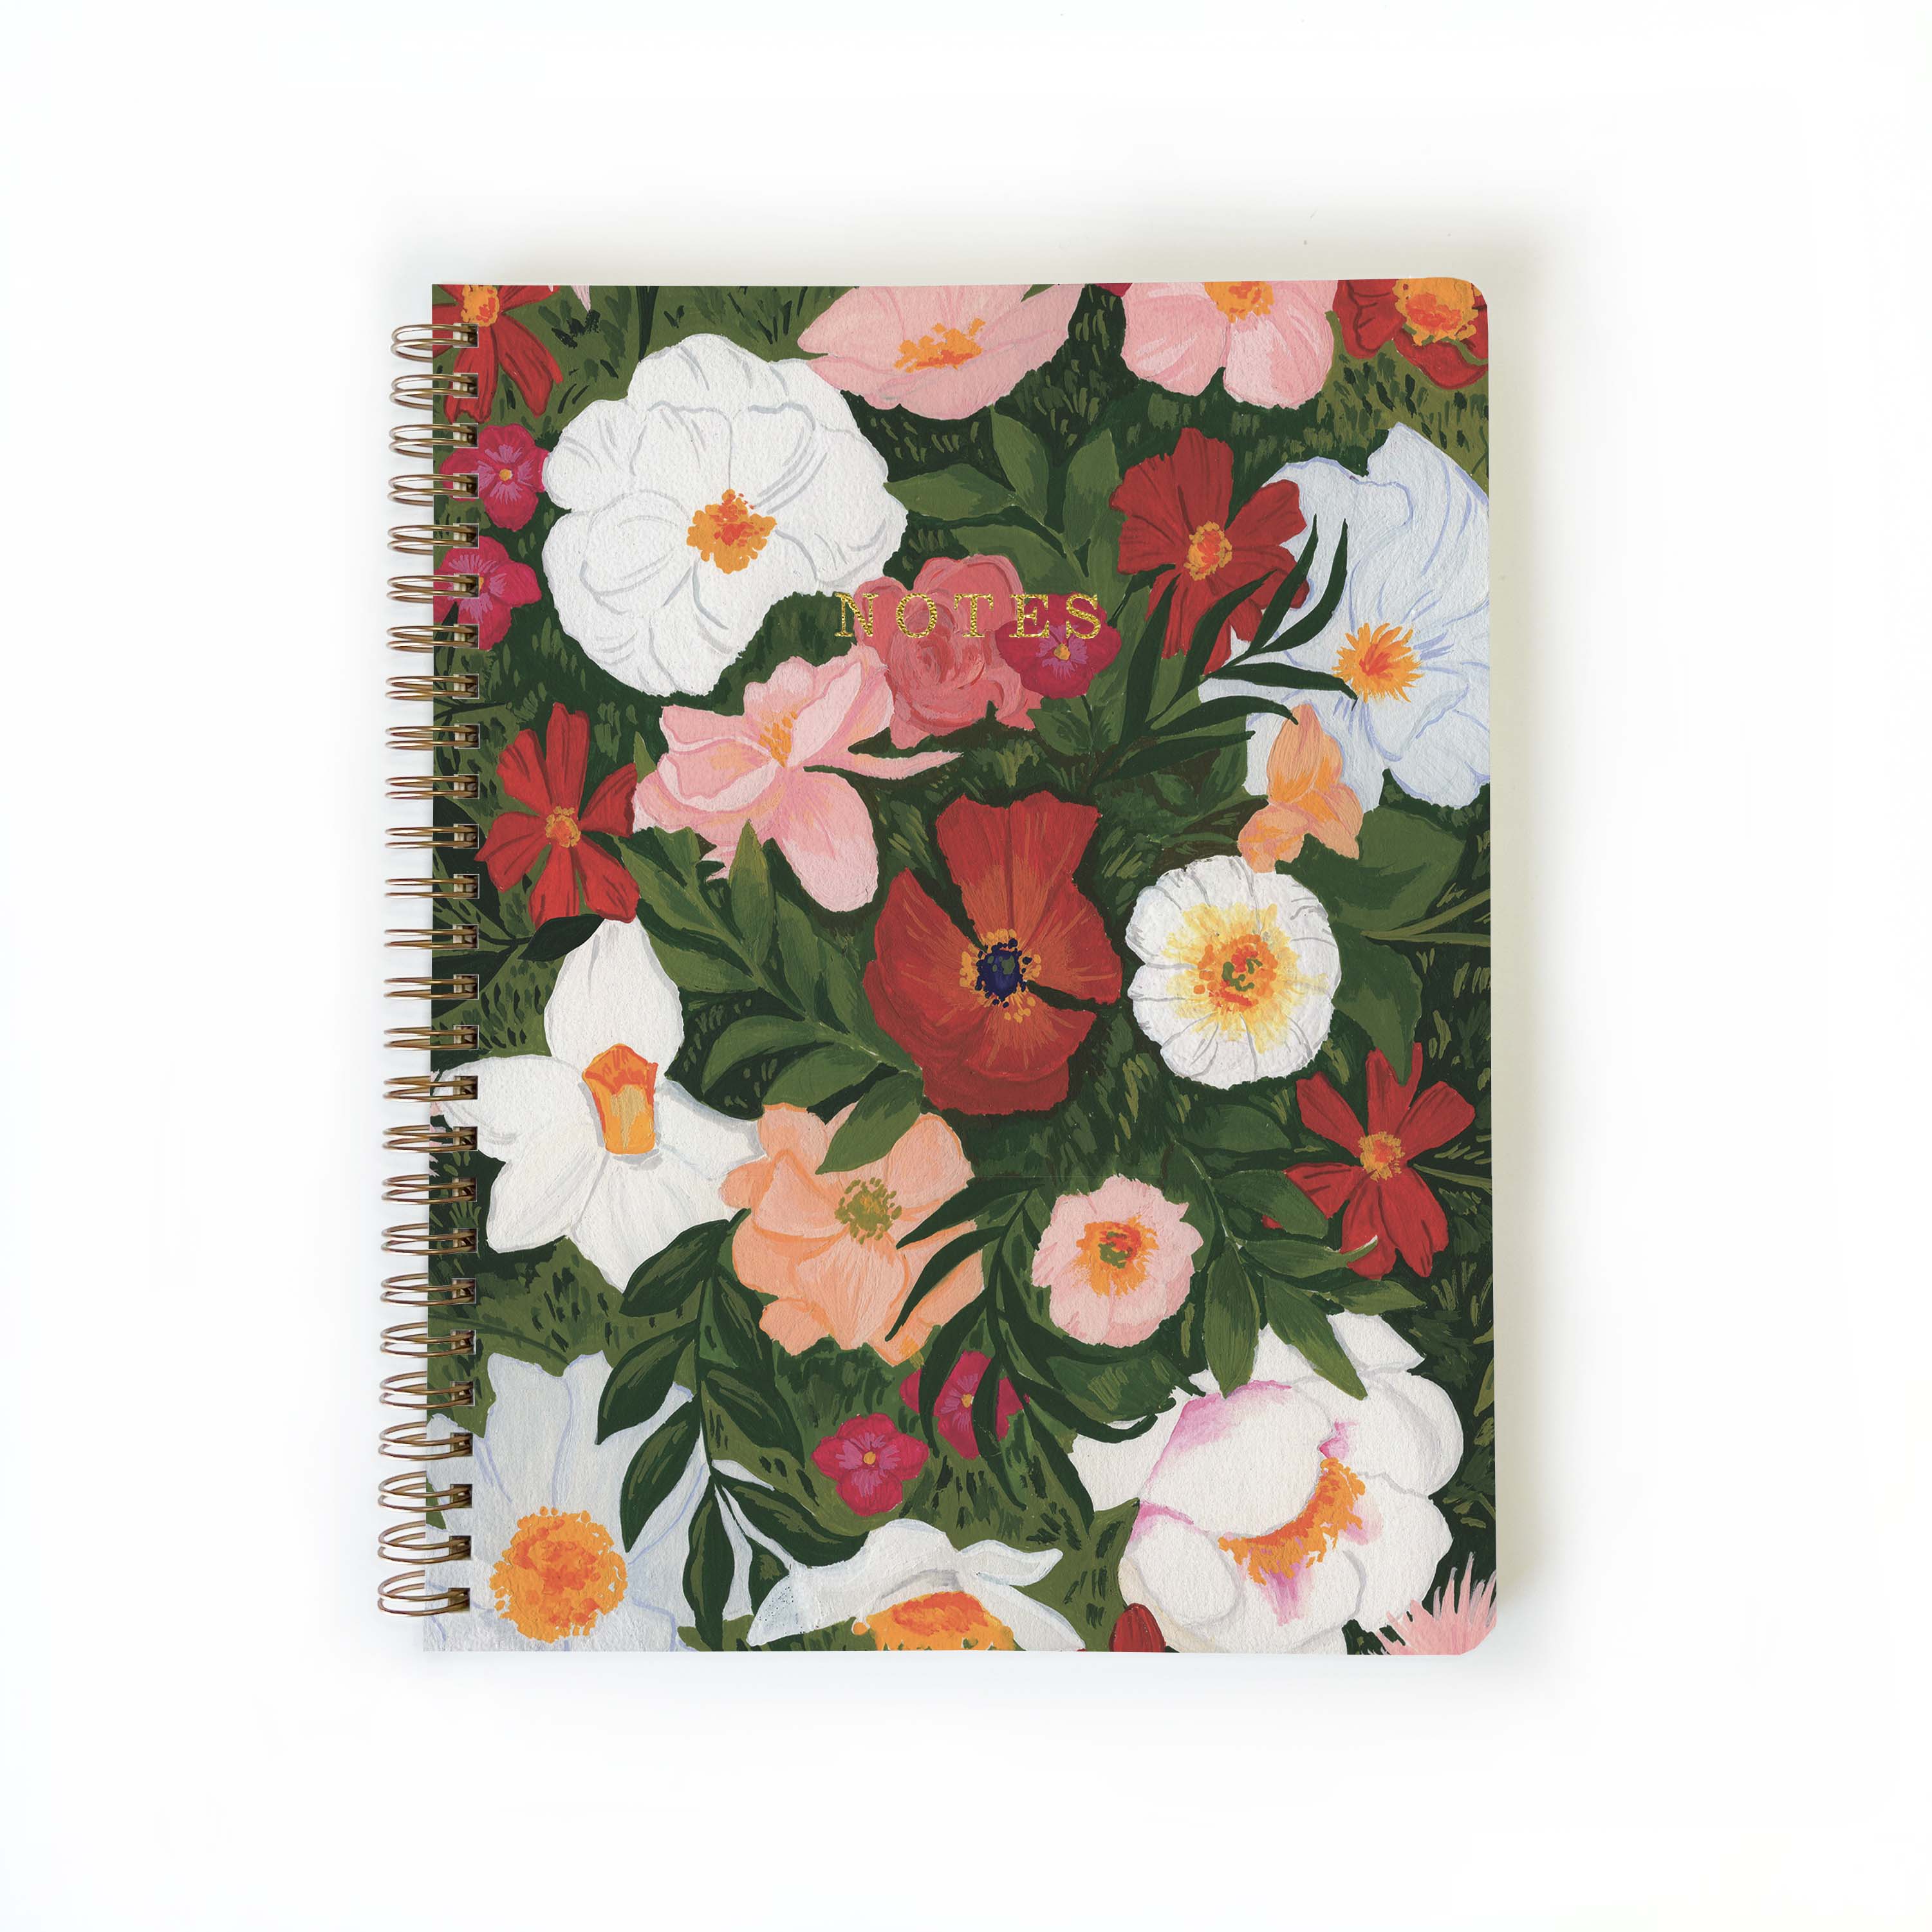 Lush Garden Notebook Journal: Small Notebook / Blank Pages